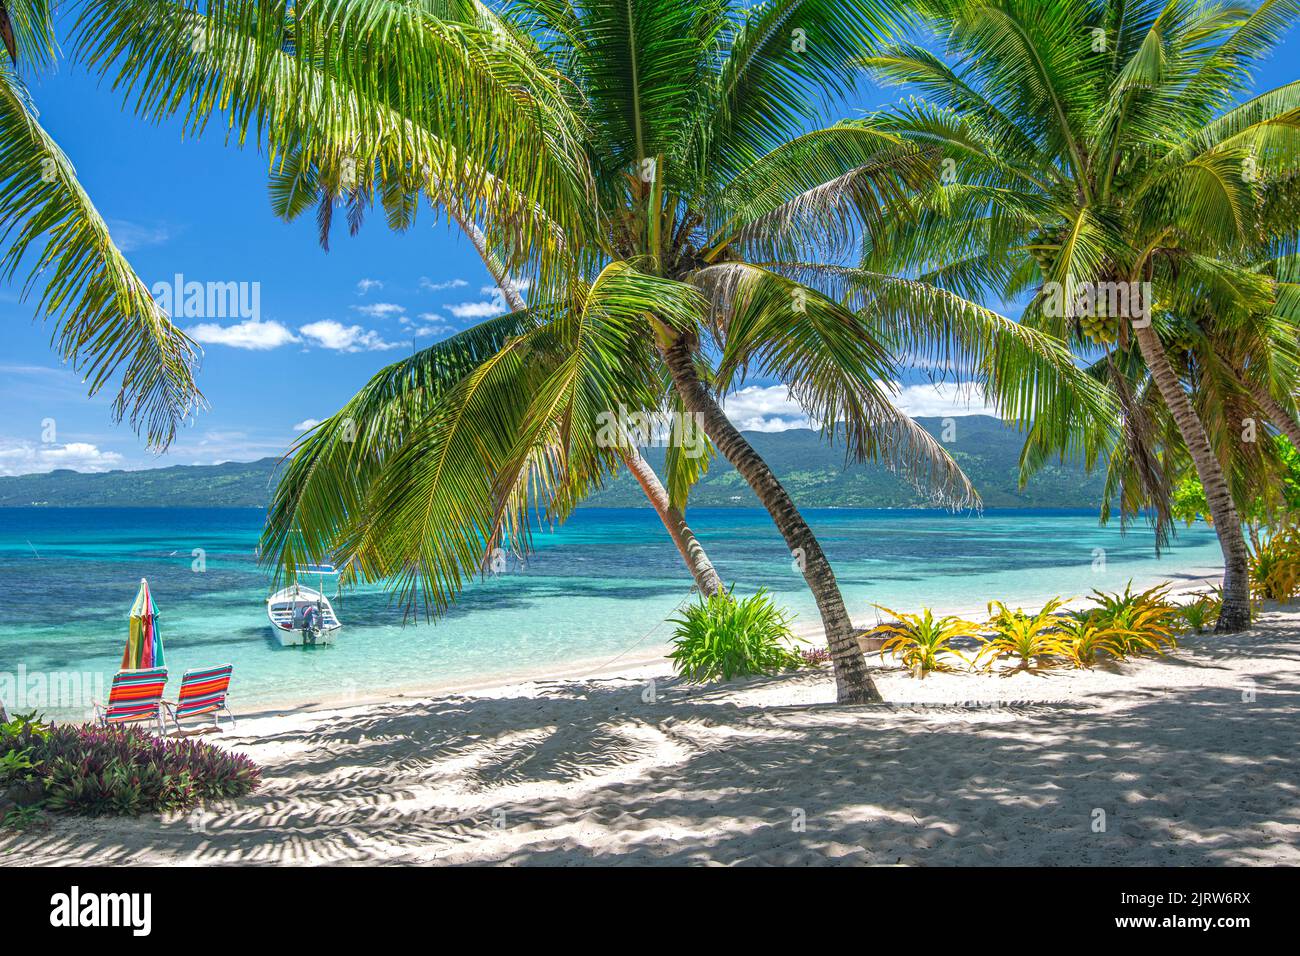 A classic view of a tropical beachfront resort in the south pacific showing plenty of sunshine, blue water and vibrant skies. Stock Photo